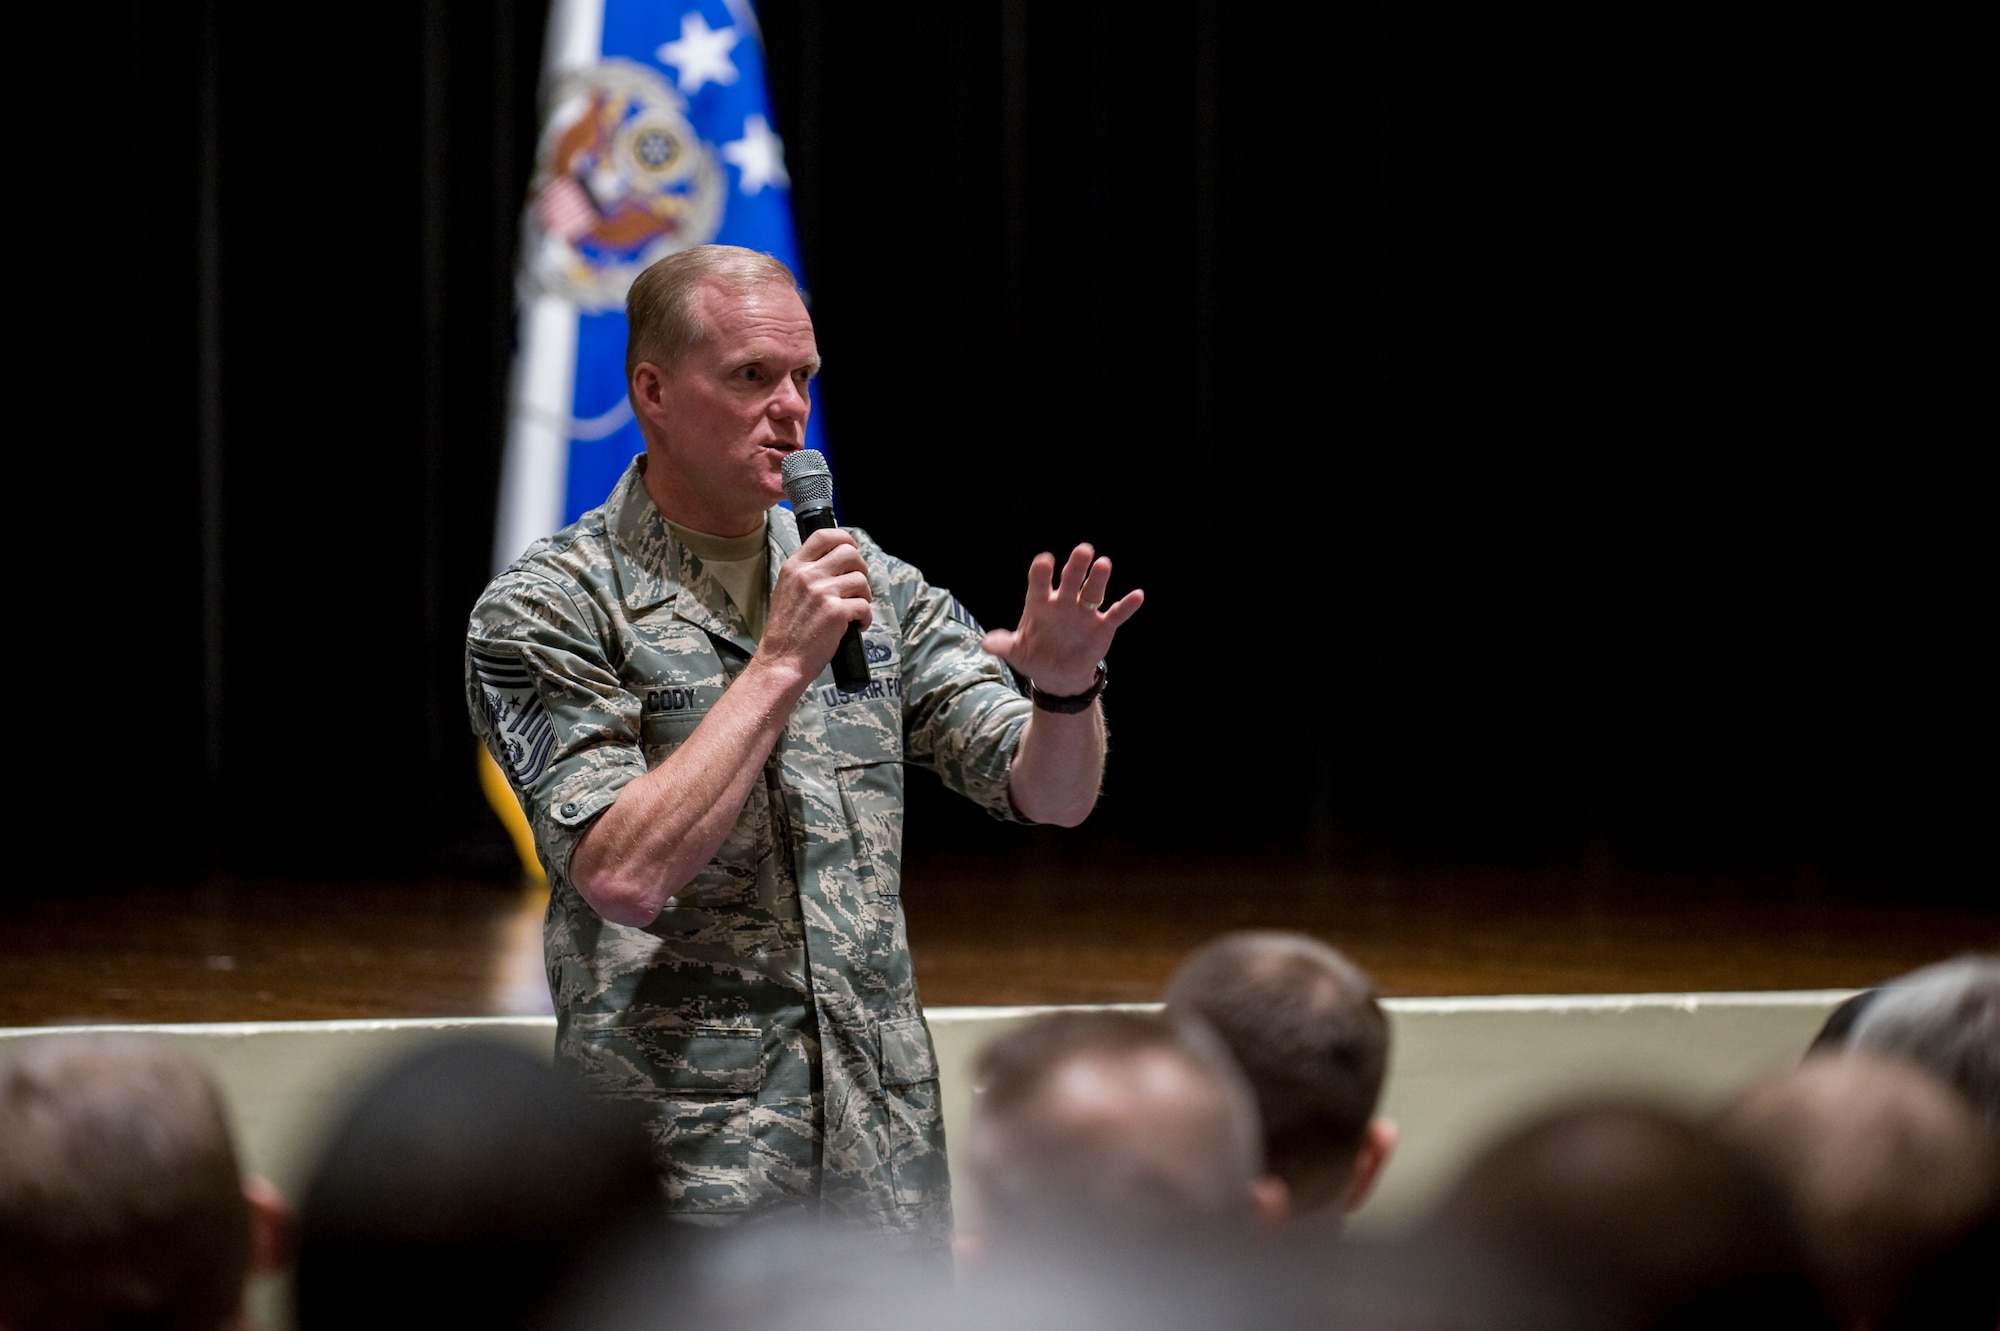 Chief Master Sgt. of the Air Force James Cody addresses the crowd during an all call Oct. 9, 2014, at Seymour Johnson Air Force Base, N.C. Cody paid visits to several units throughout the 4th Fighter Wing as well as the base’s Reserve component, the 916th Air Refueling Wing. During his all calls, Cody discussed force management, professional military education, the enlisted evaluation and promotion system, and the challenges ahead for the Air Force. (U.S. Air Force photo/Airman 1st Class Aaron Jenne)